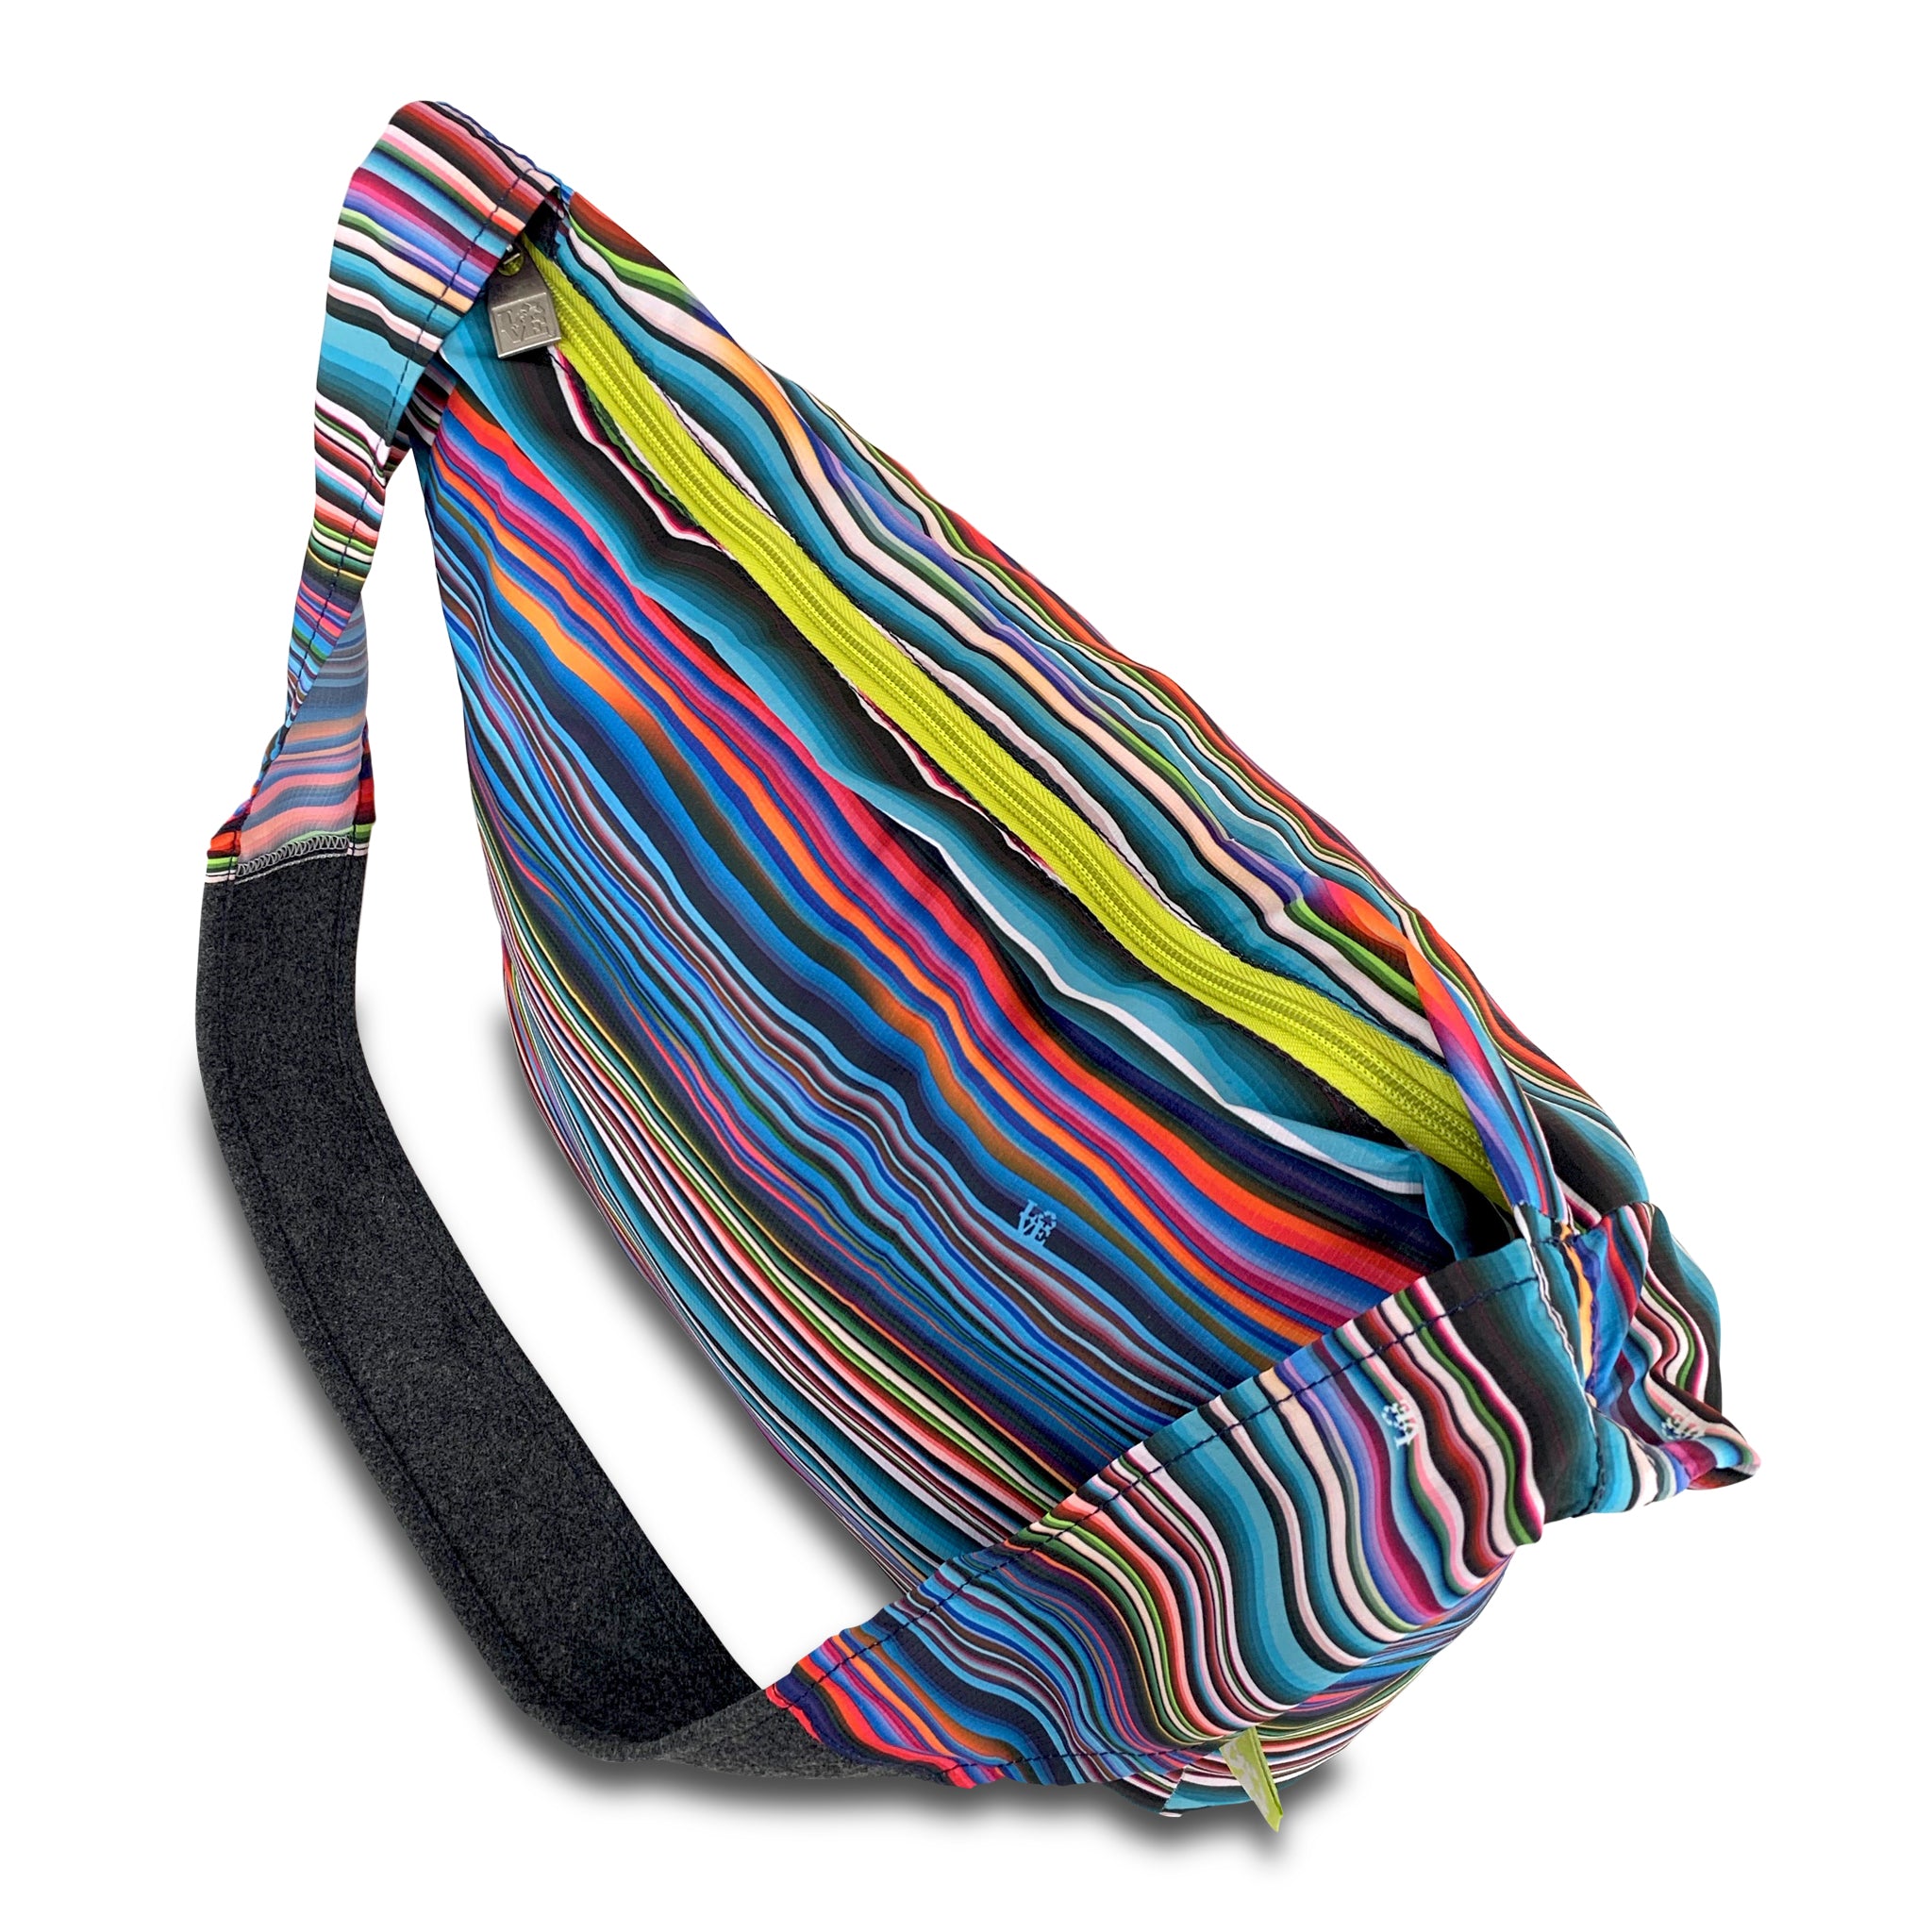 Crossbody Stash It Tote Bag - Wavy Gravy (with extra long strap) - LOVE  Reusable Bags